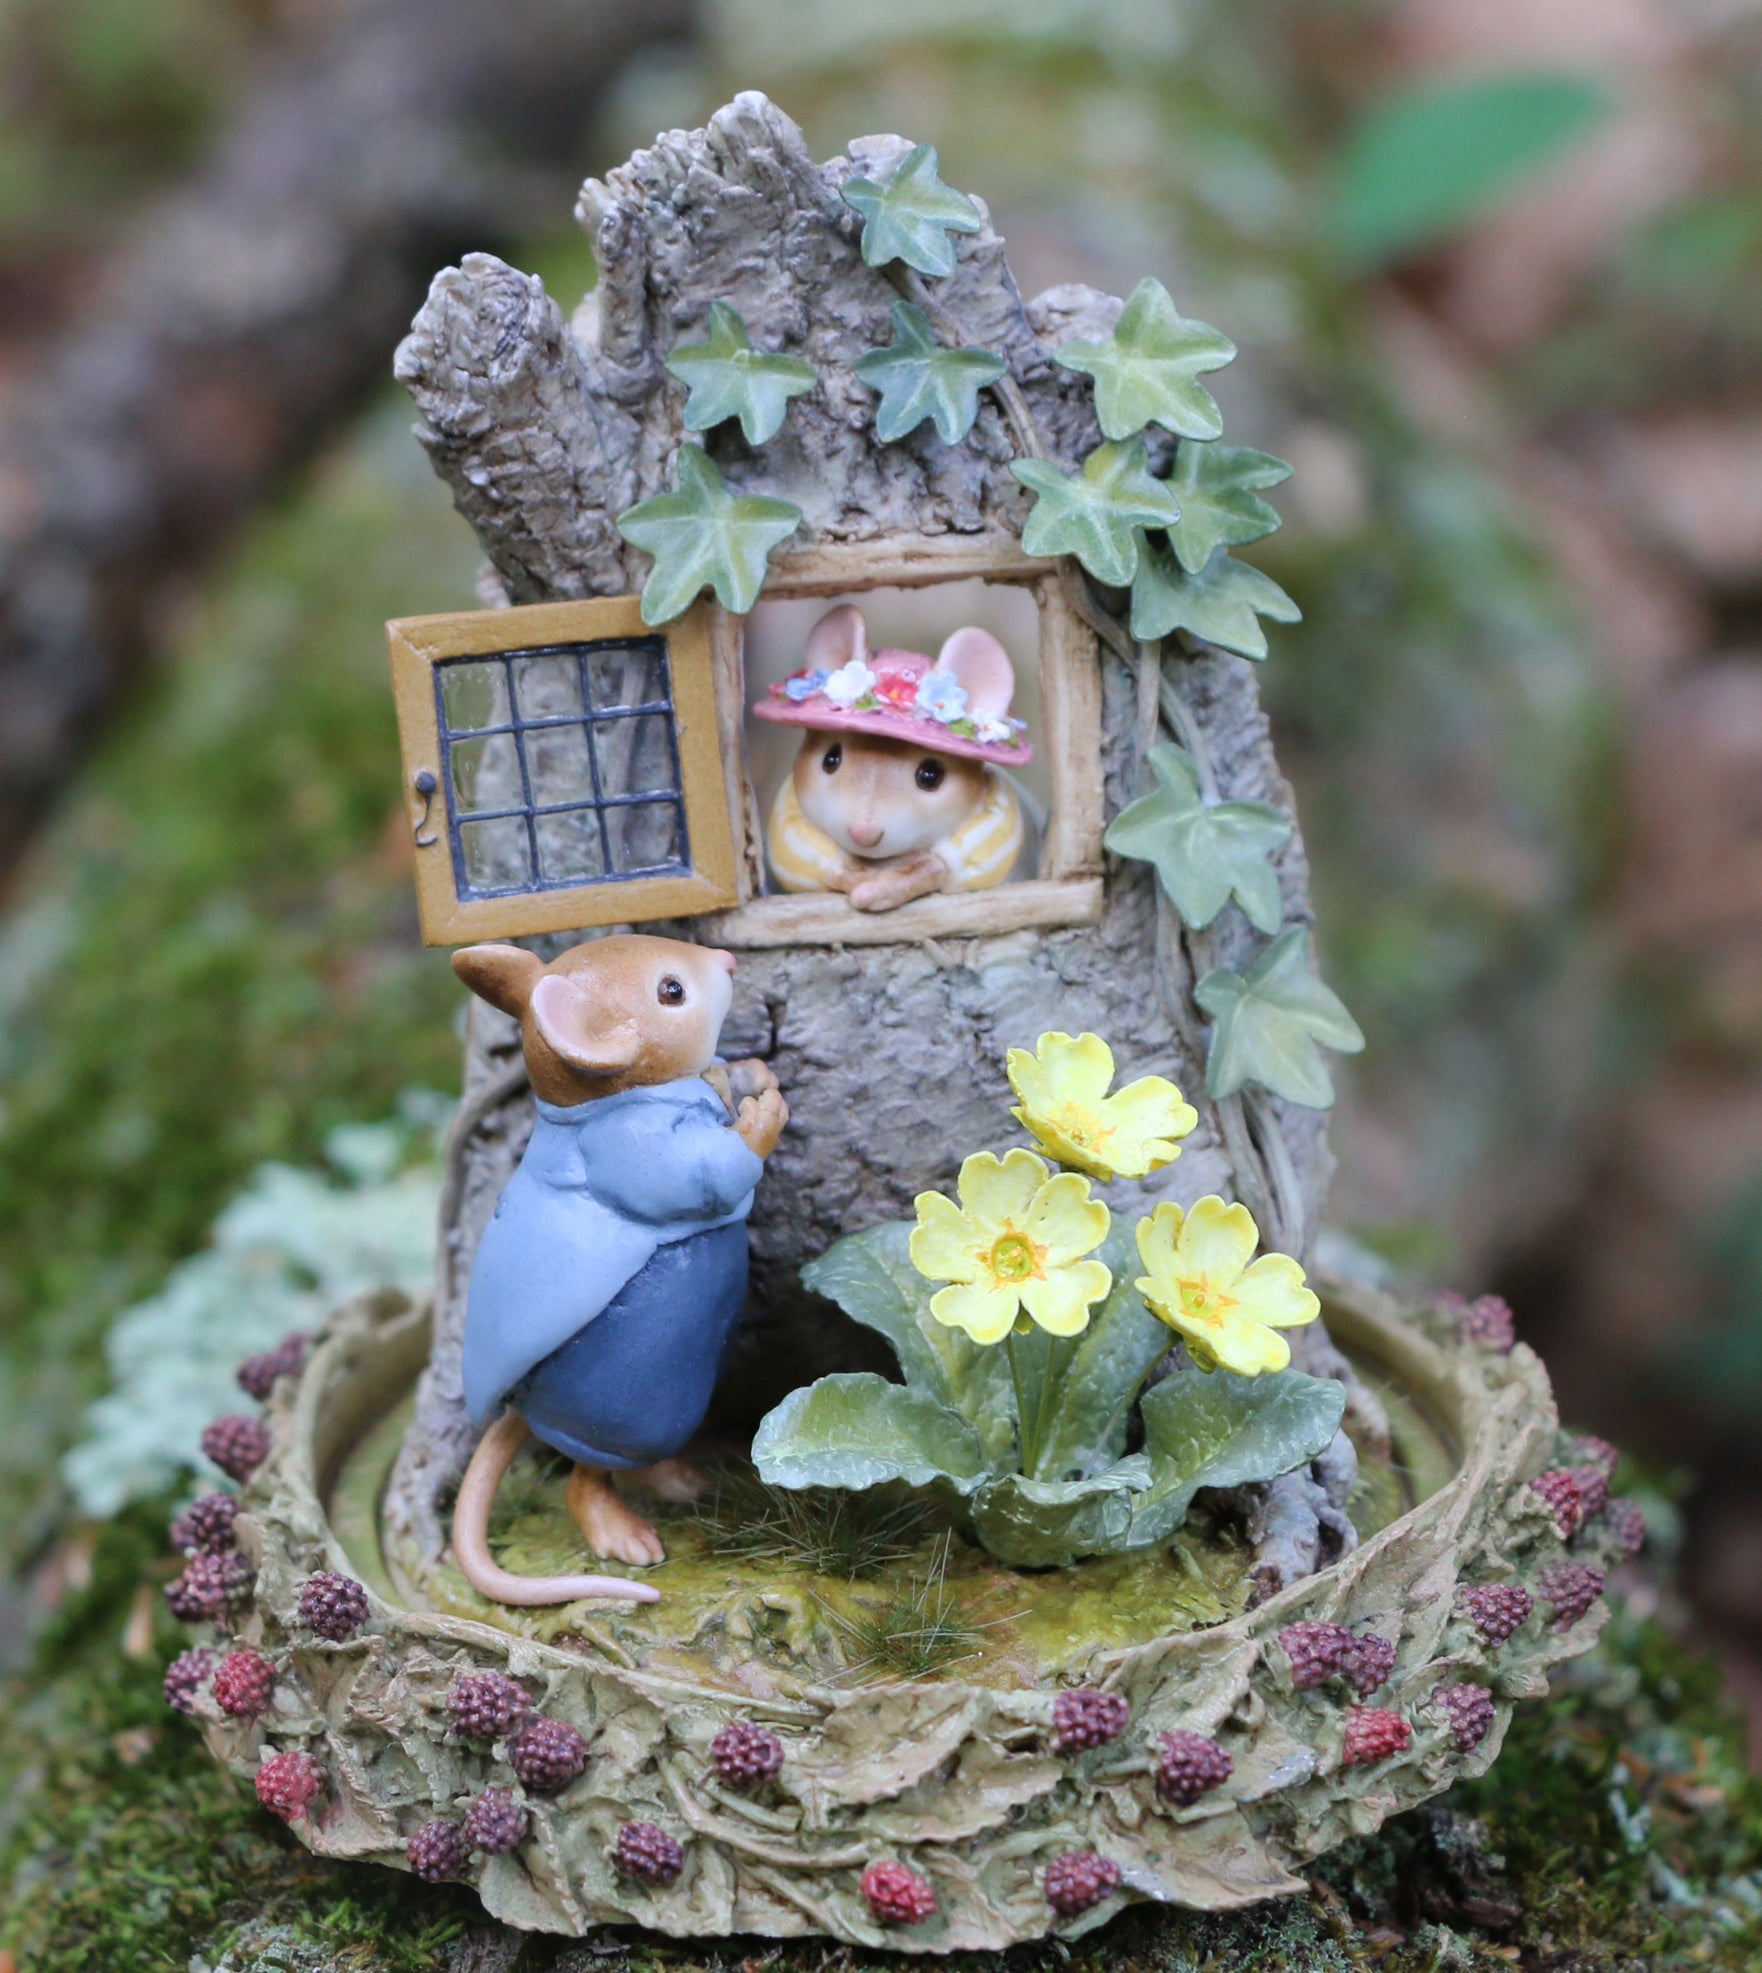 Brambly Hedge's 40th Anniversary - Wee Forest Folk